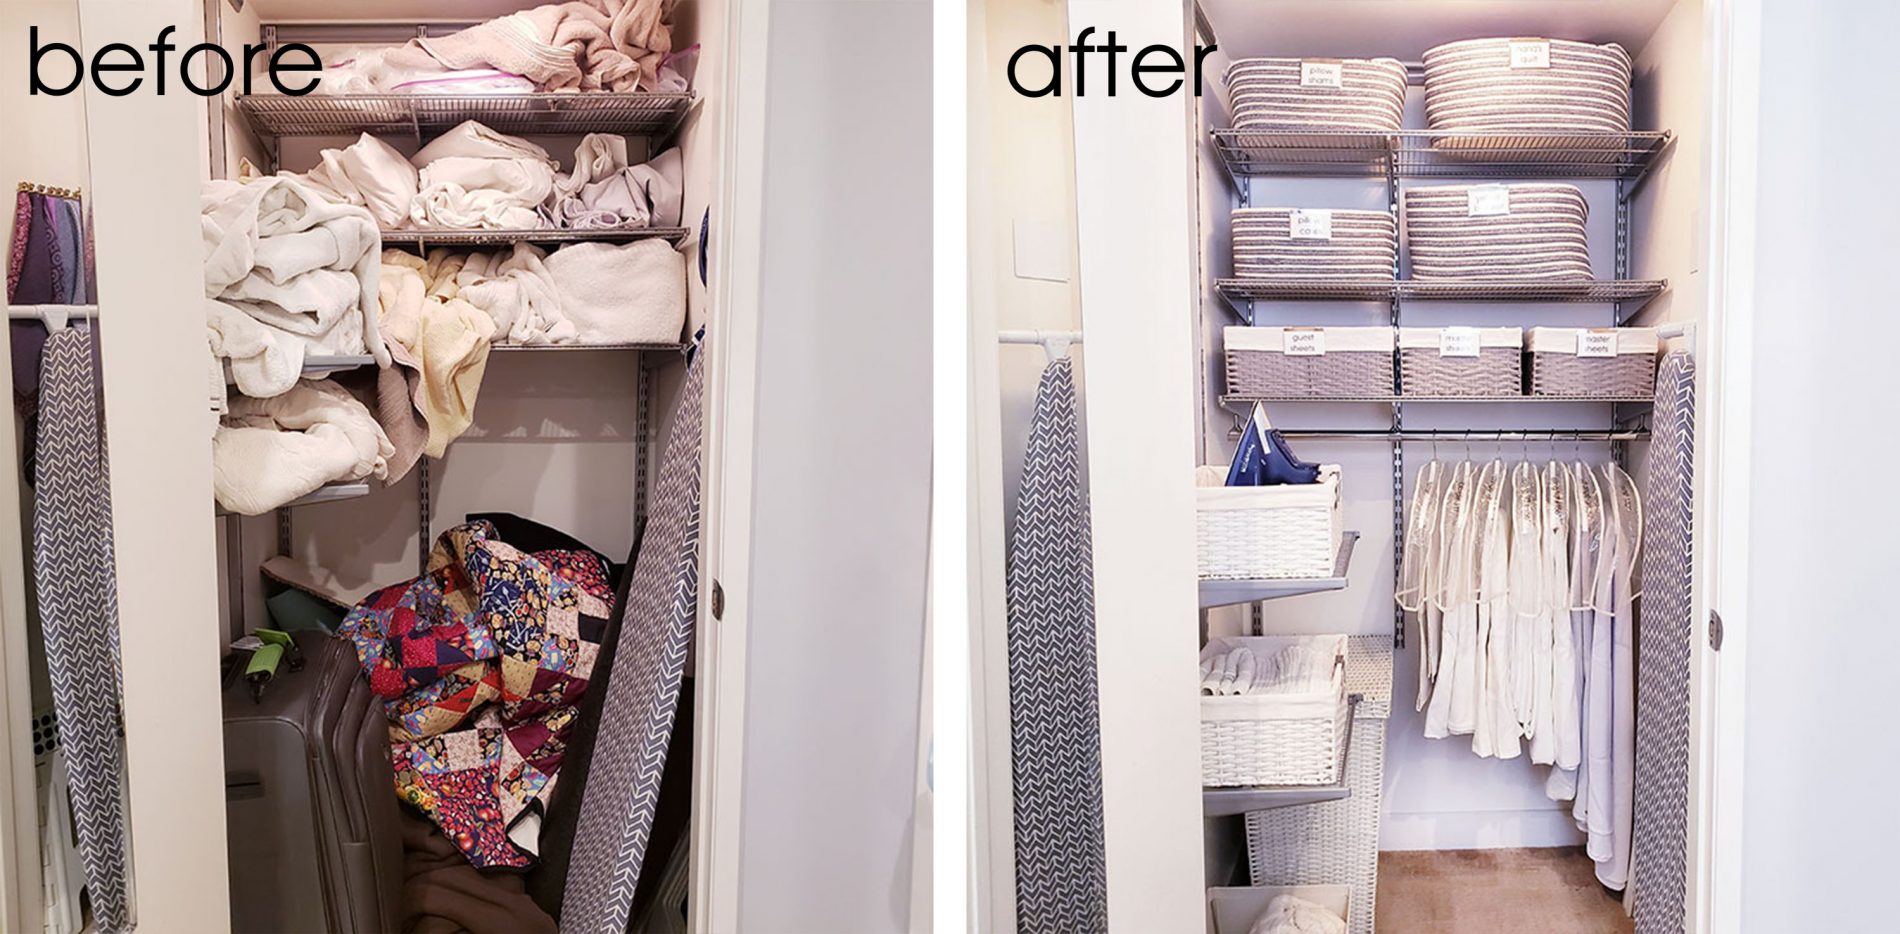 Before and after photos of organizing your linen closet with clothes and towels.